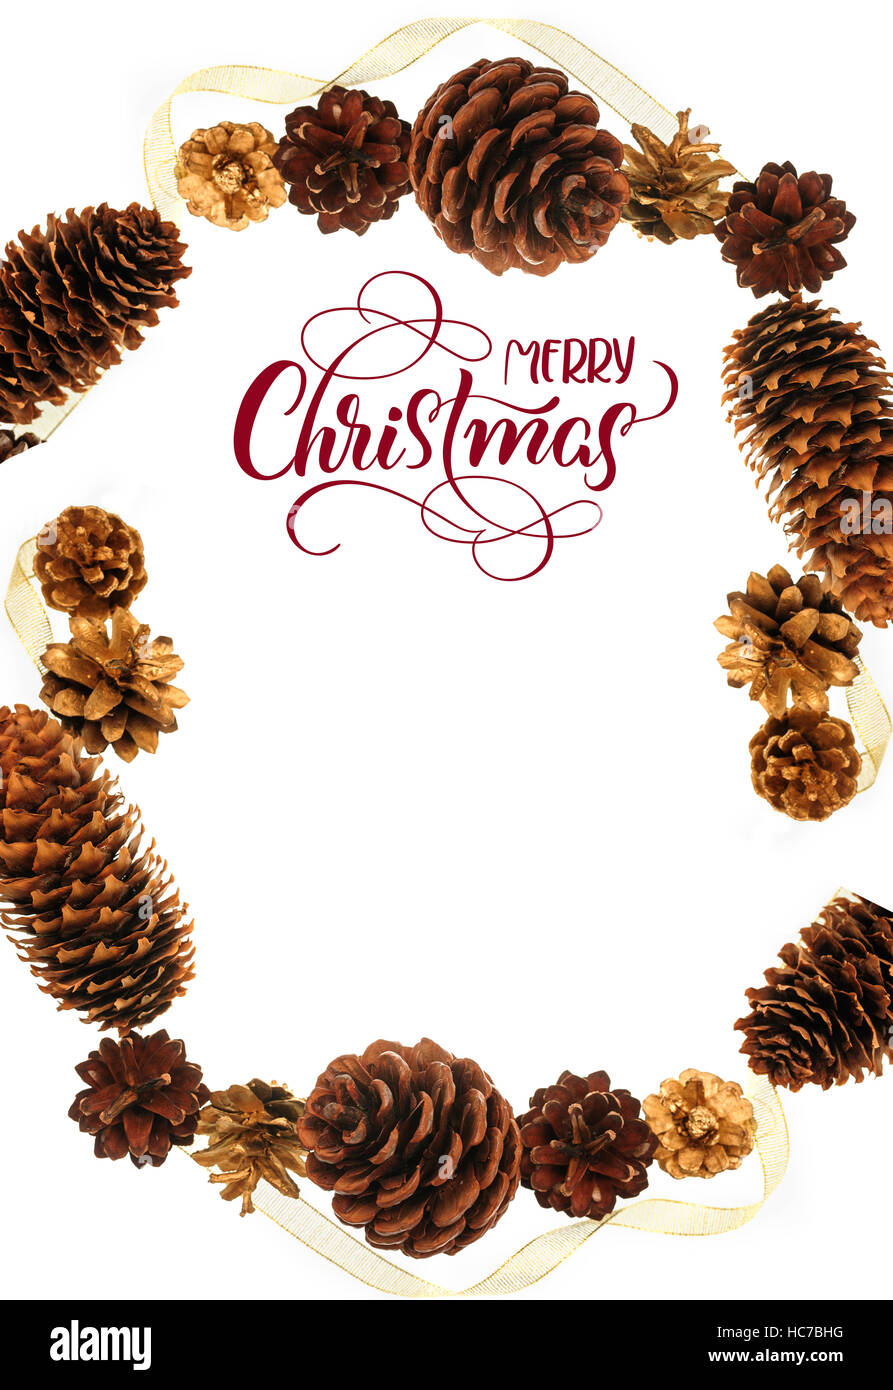 frame of pine cones and text Merry Christmas. Calligraphy lettering Stock Photo